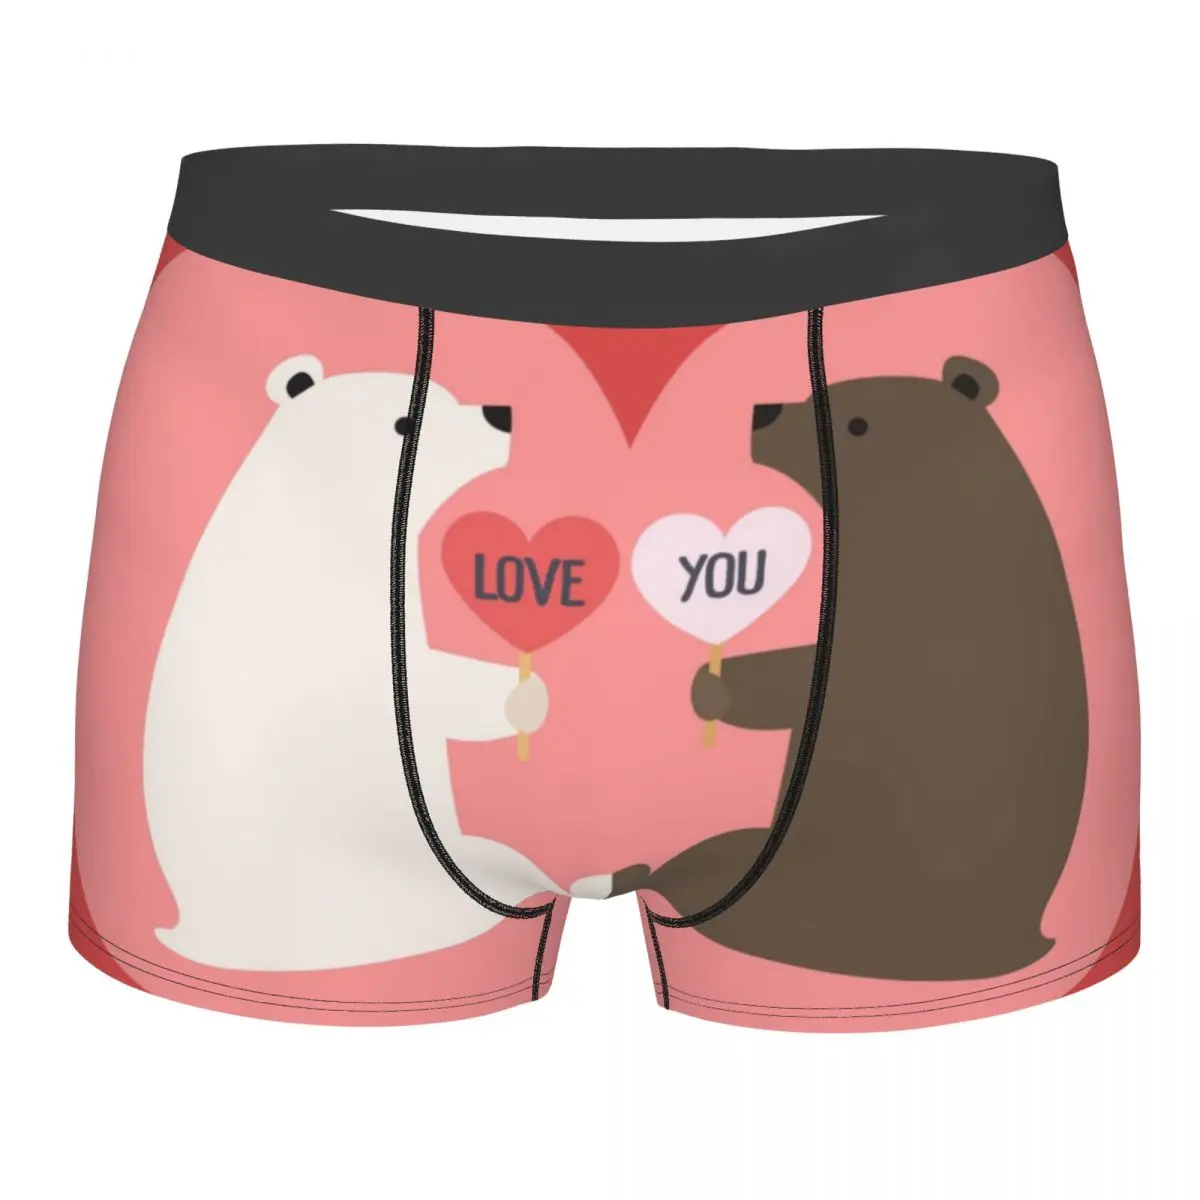 Mens Boxer Sexy Underwear Bears Hold Hearts With The Inscription I Love You Underpants Male Panties Pouch Short Pants